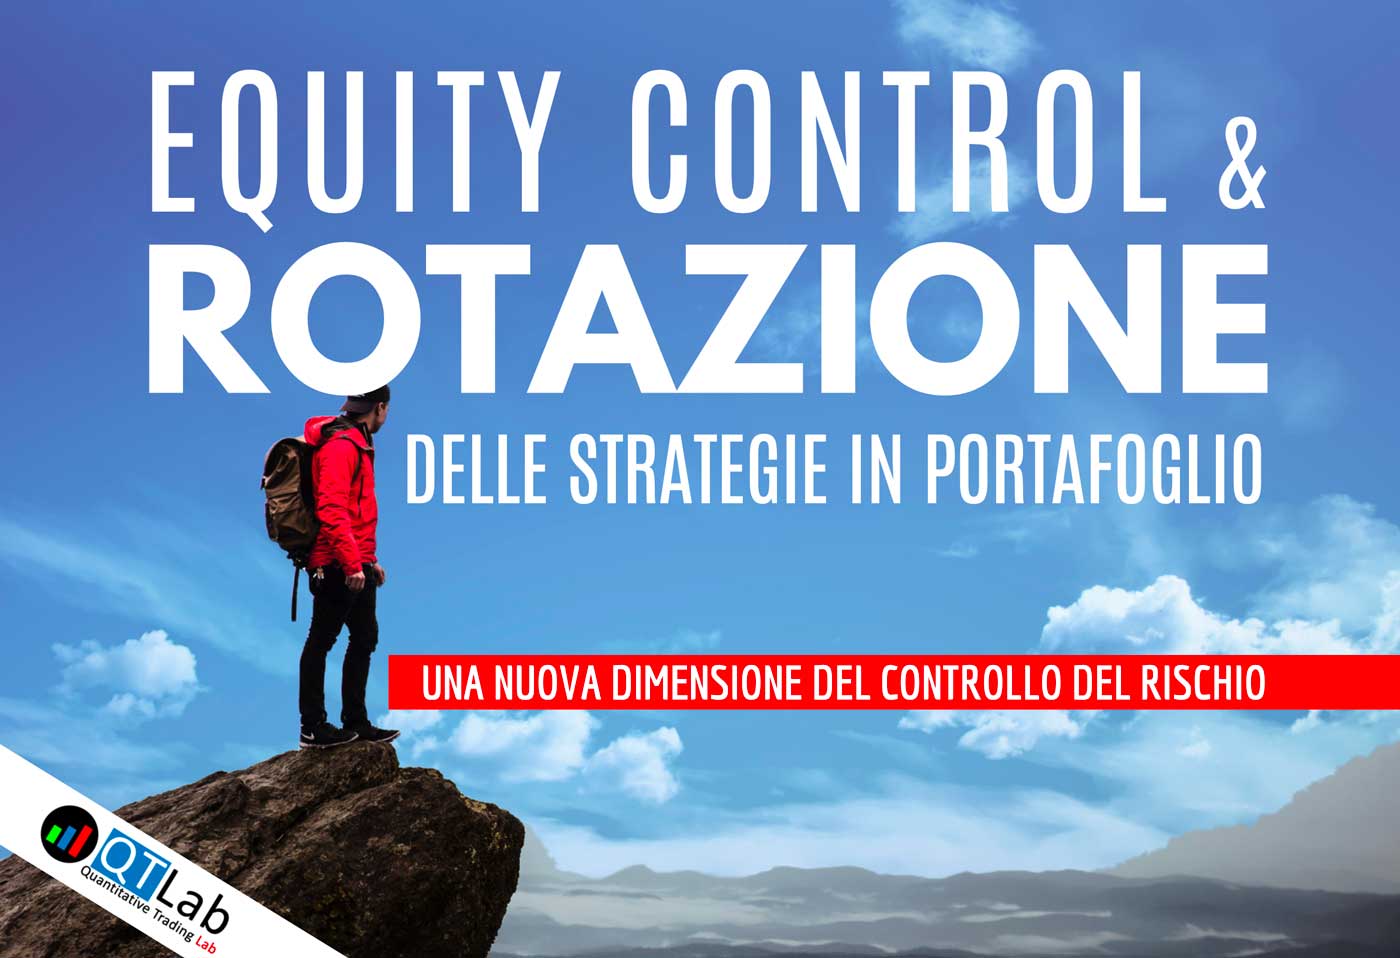 qtlab corso trading systems online, equity control, trading system automatico